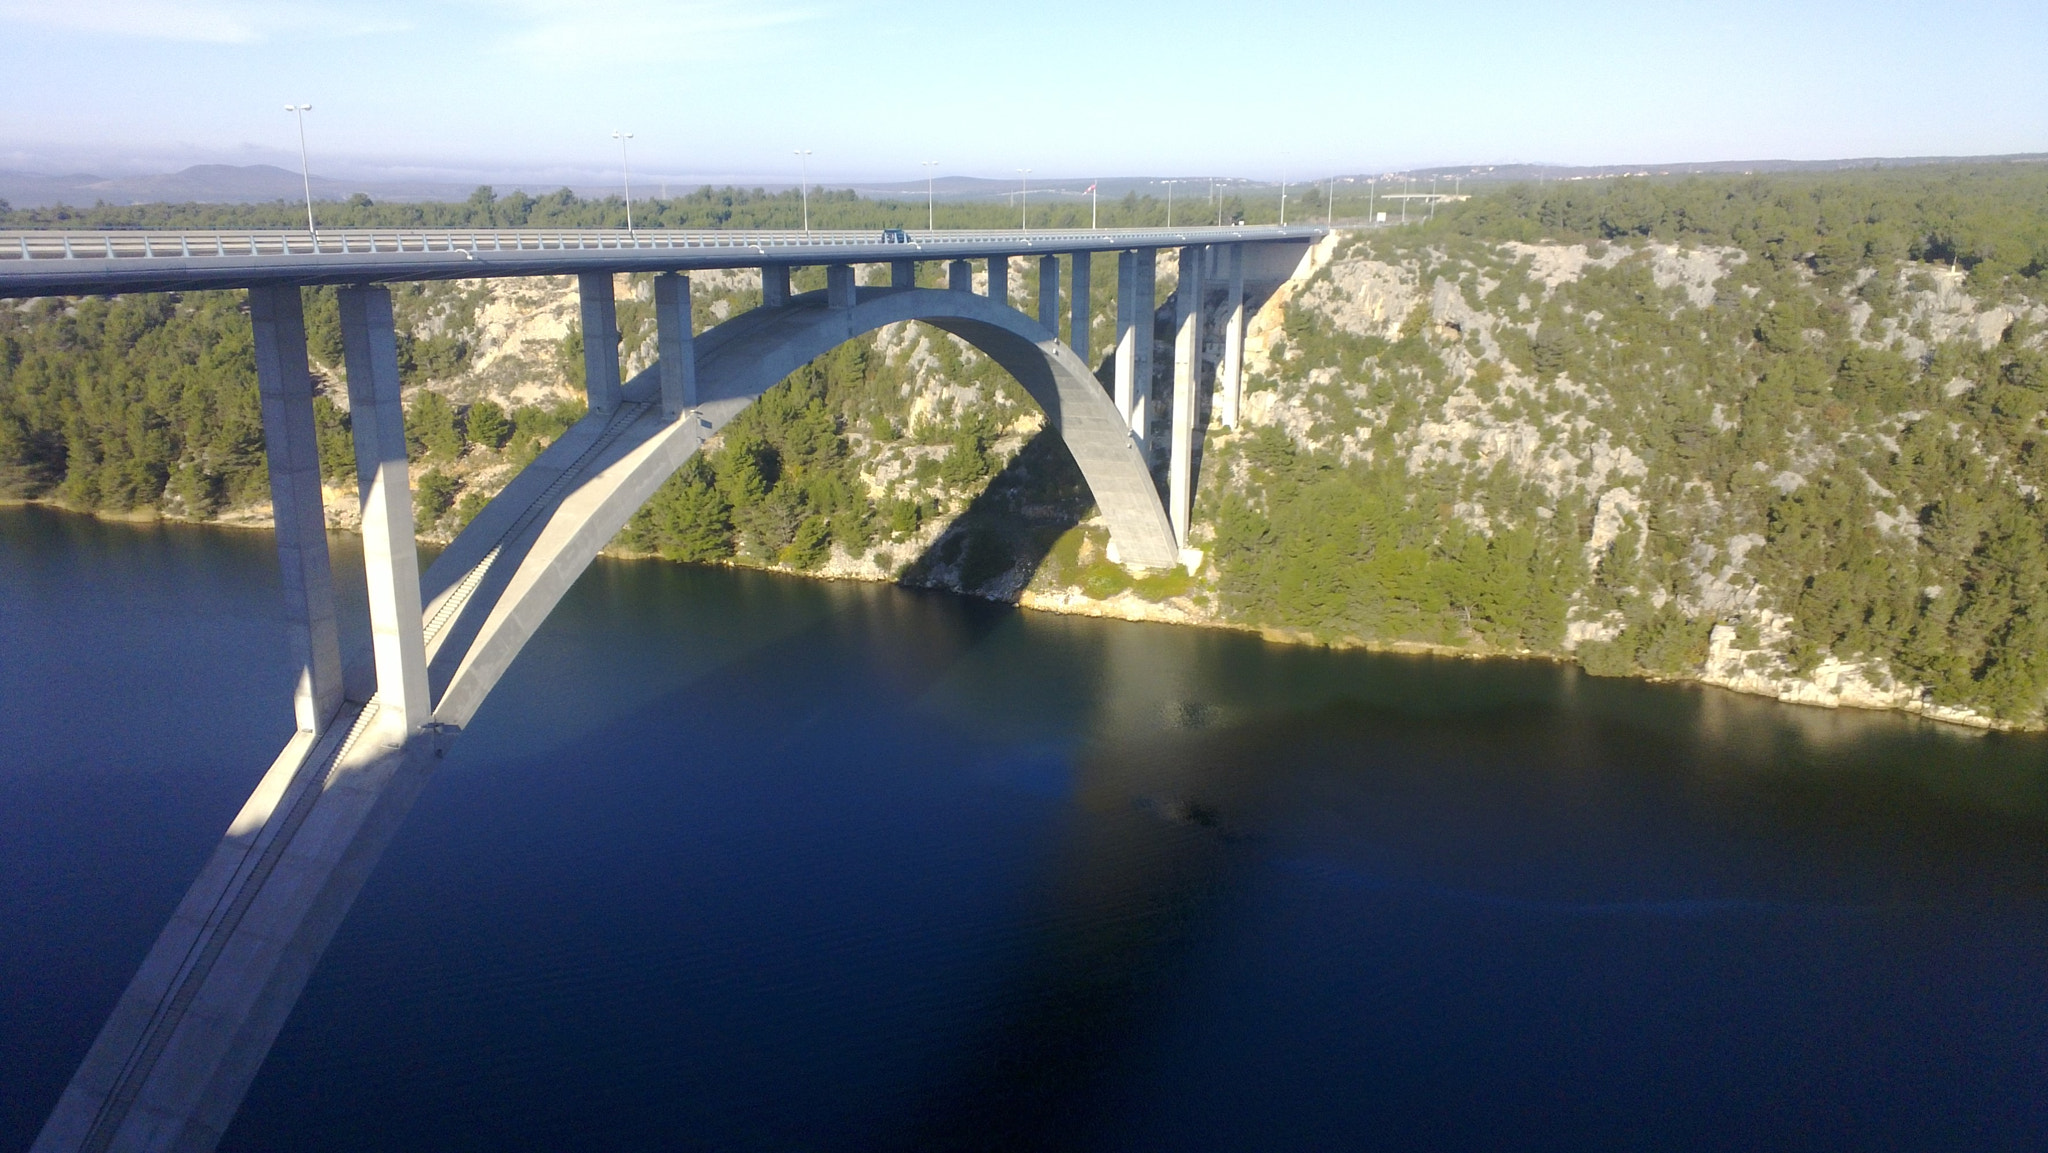 Nokia N9 sample photo. Skradin, restplace on highway a1. photography